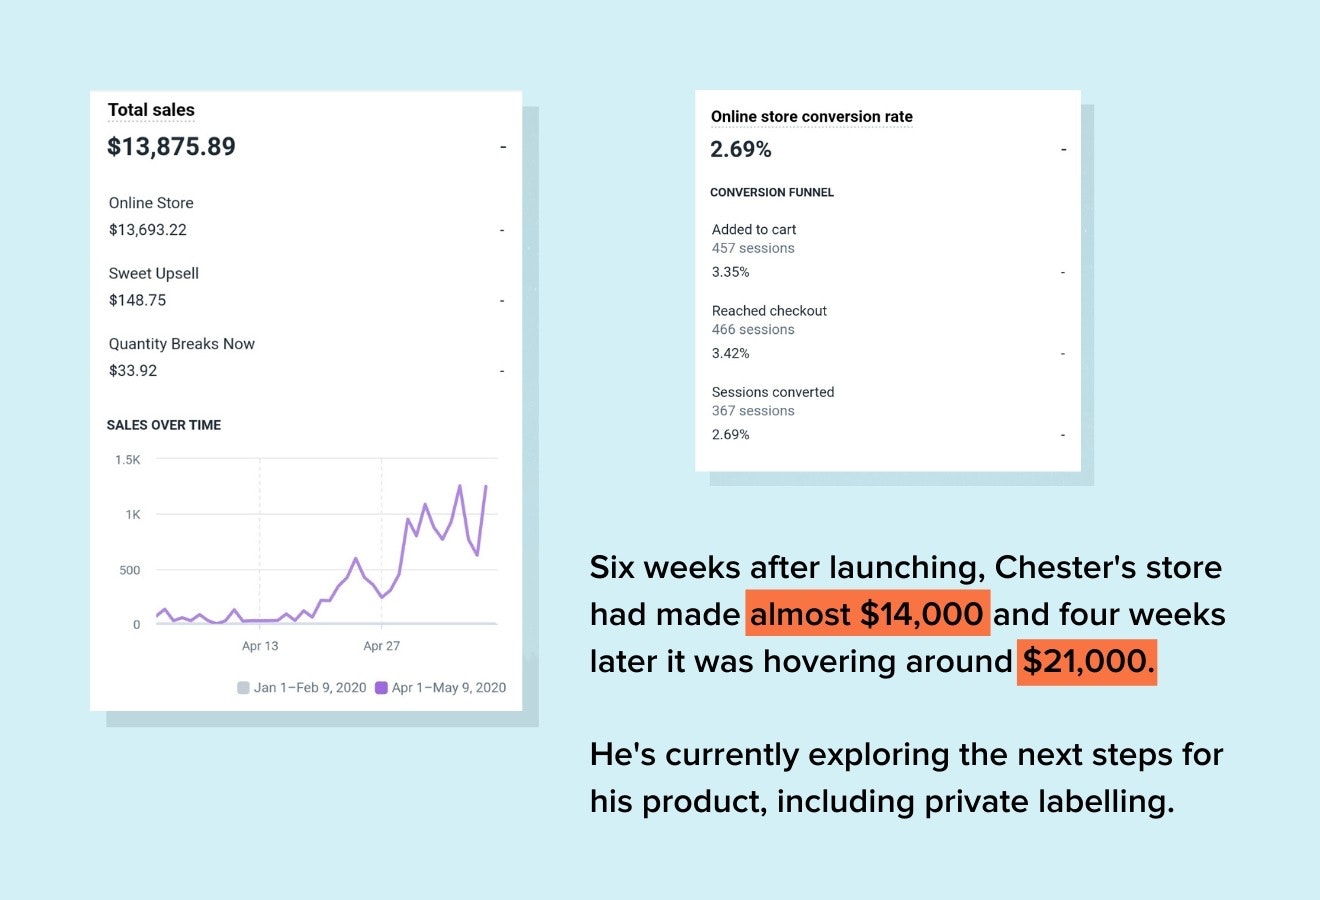 Chester's sales revenue and conversion rate mid-May